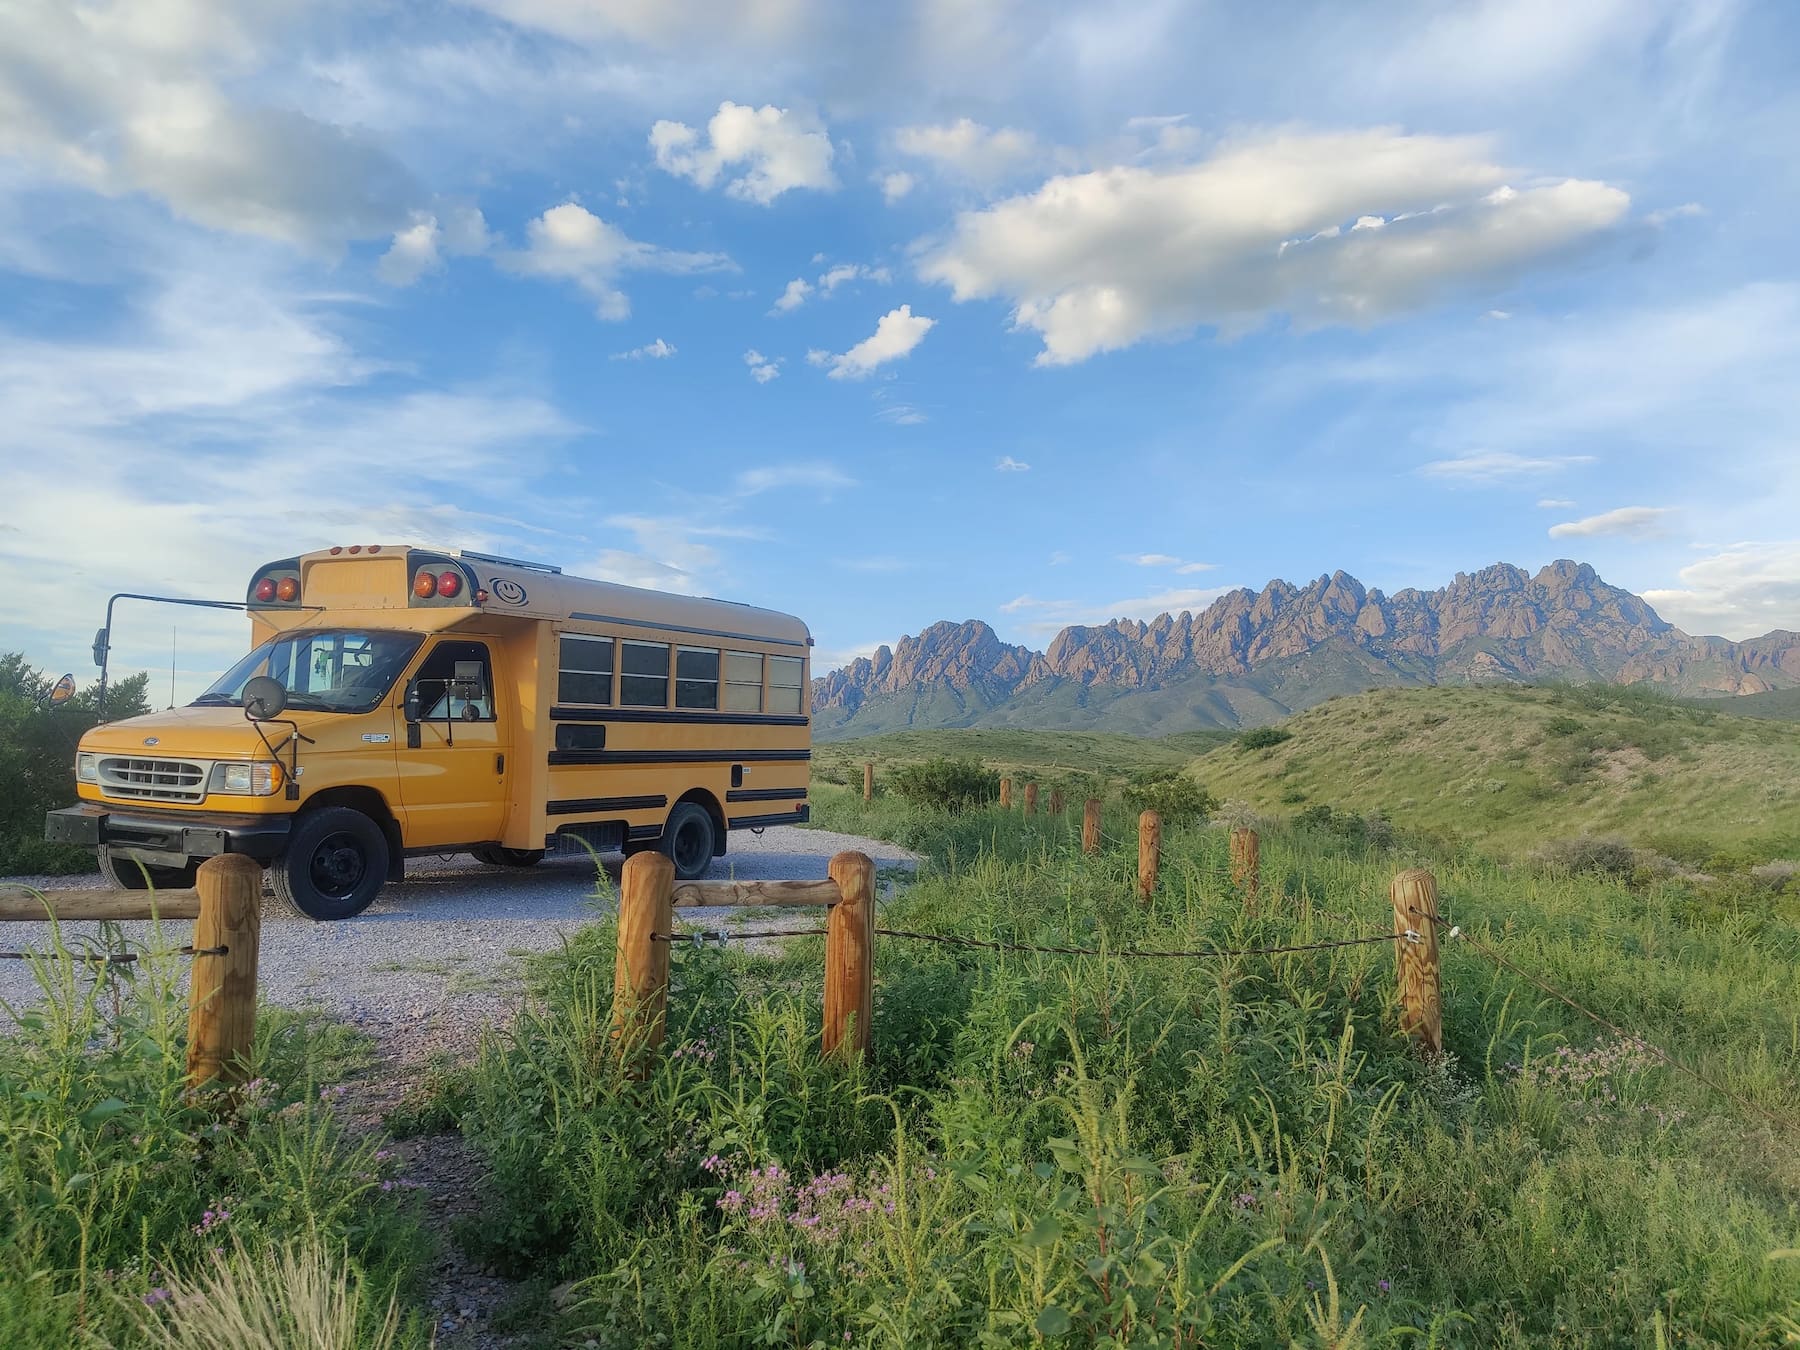 Short yellow school bus parked at a campsite beside wooden fence posts in a field and the Sierra mountains in the background.